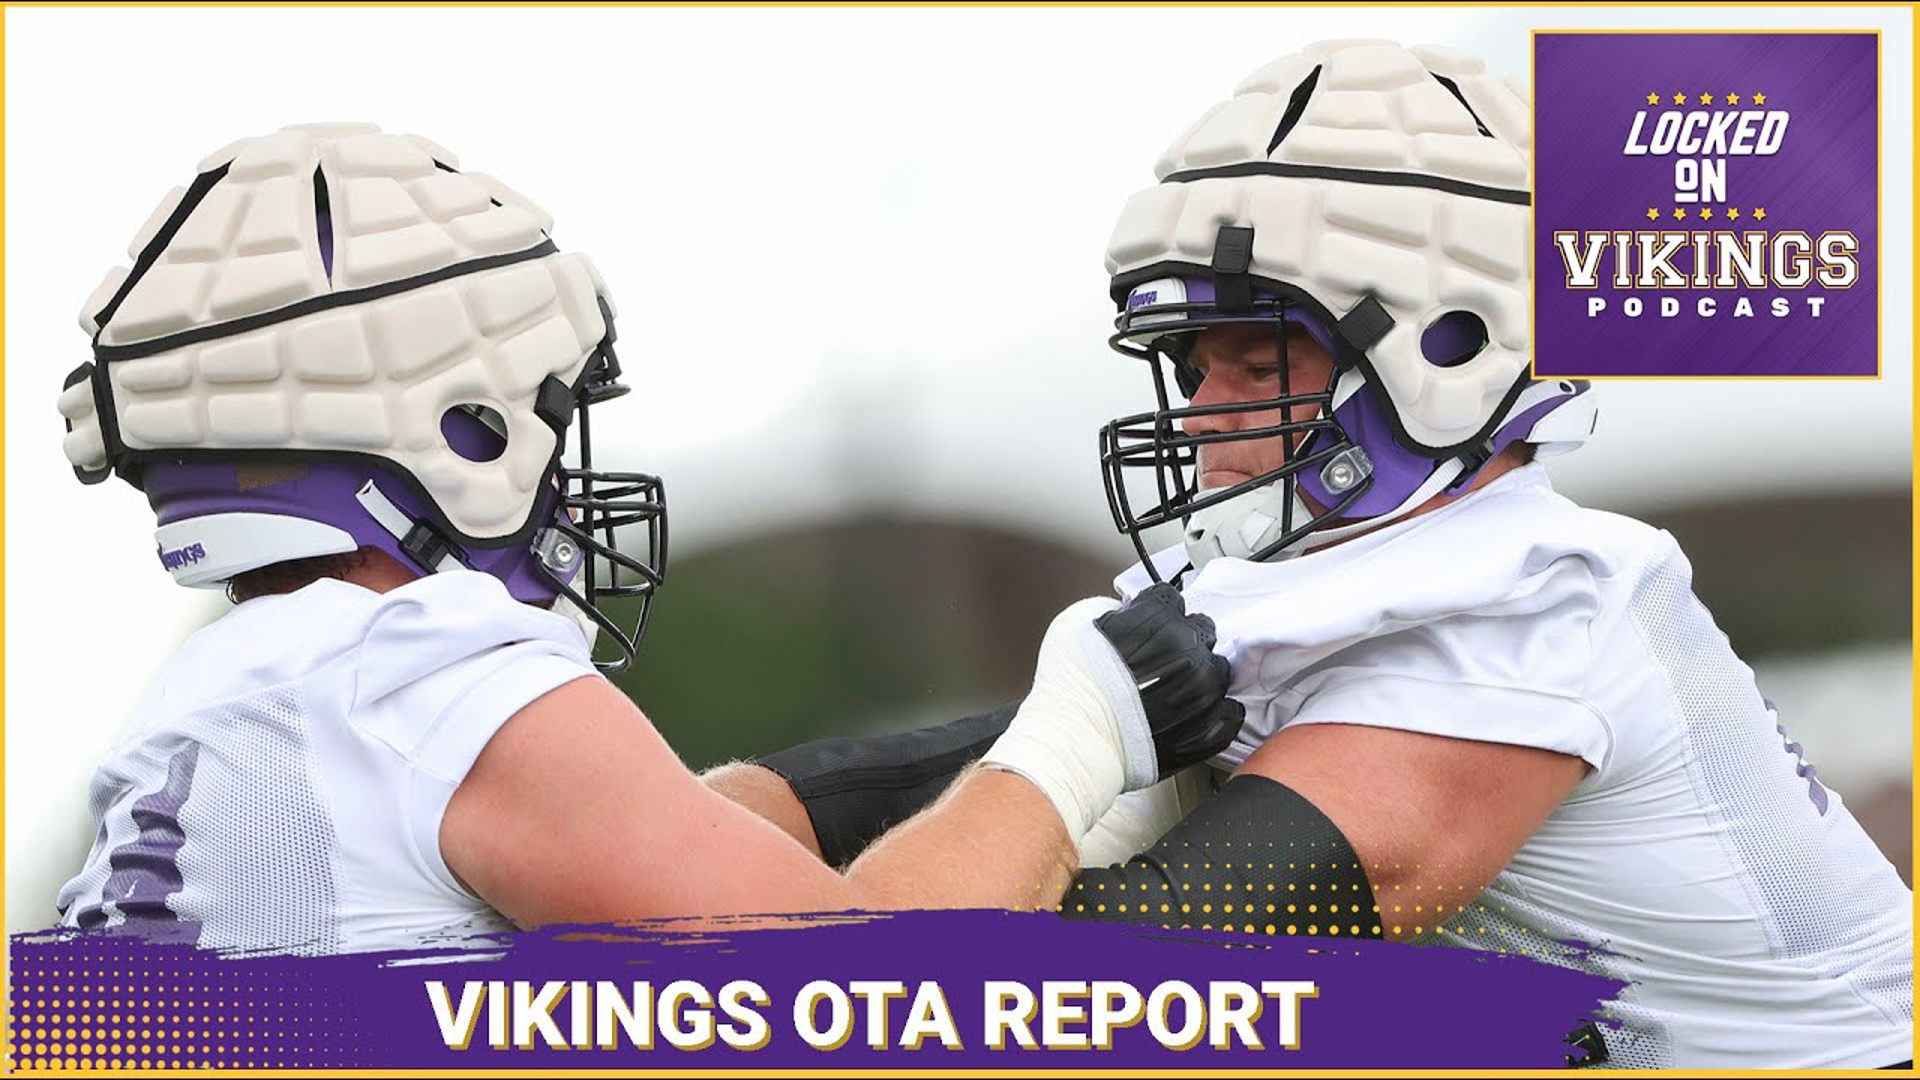 Minnesota Vikings OTA Report With The Athletic's Alec Lewis